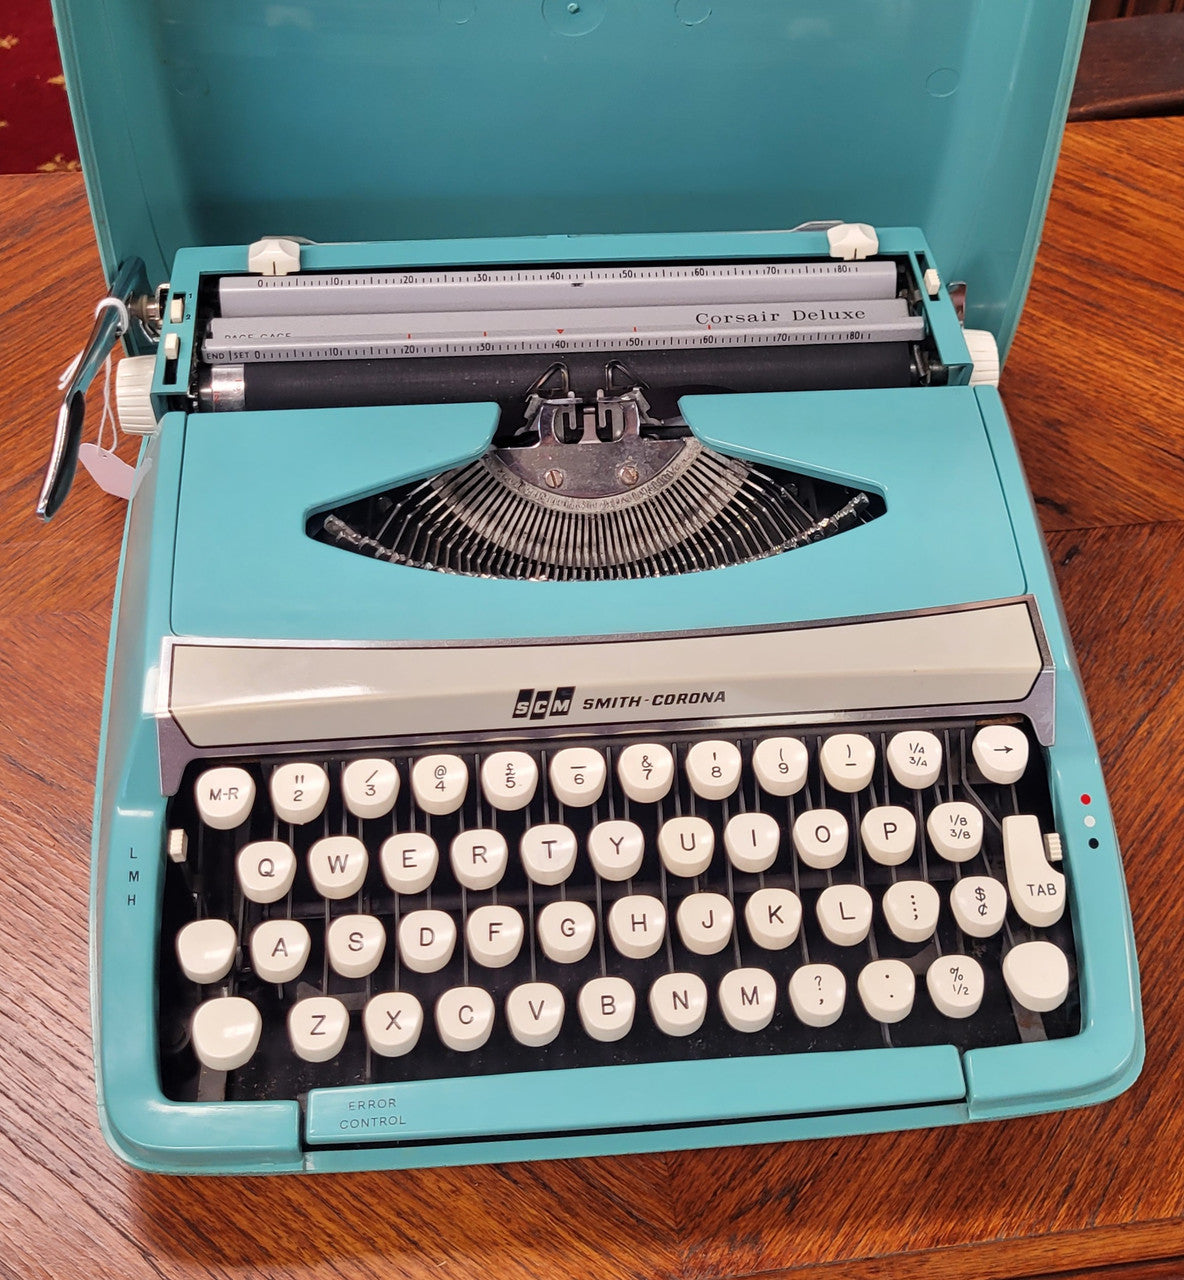 1960's Smith Corona Corsair deluxe portable typewriter. It is in working condition with a used ribbon, and comes with everything pictured. It has been sourced locally.